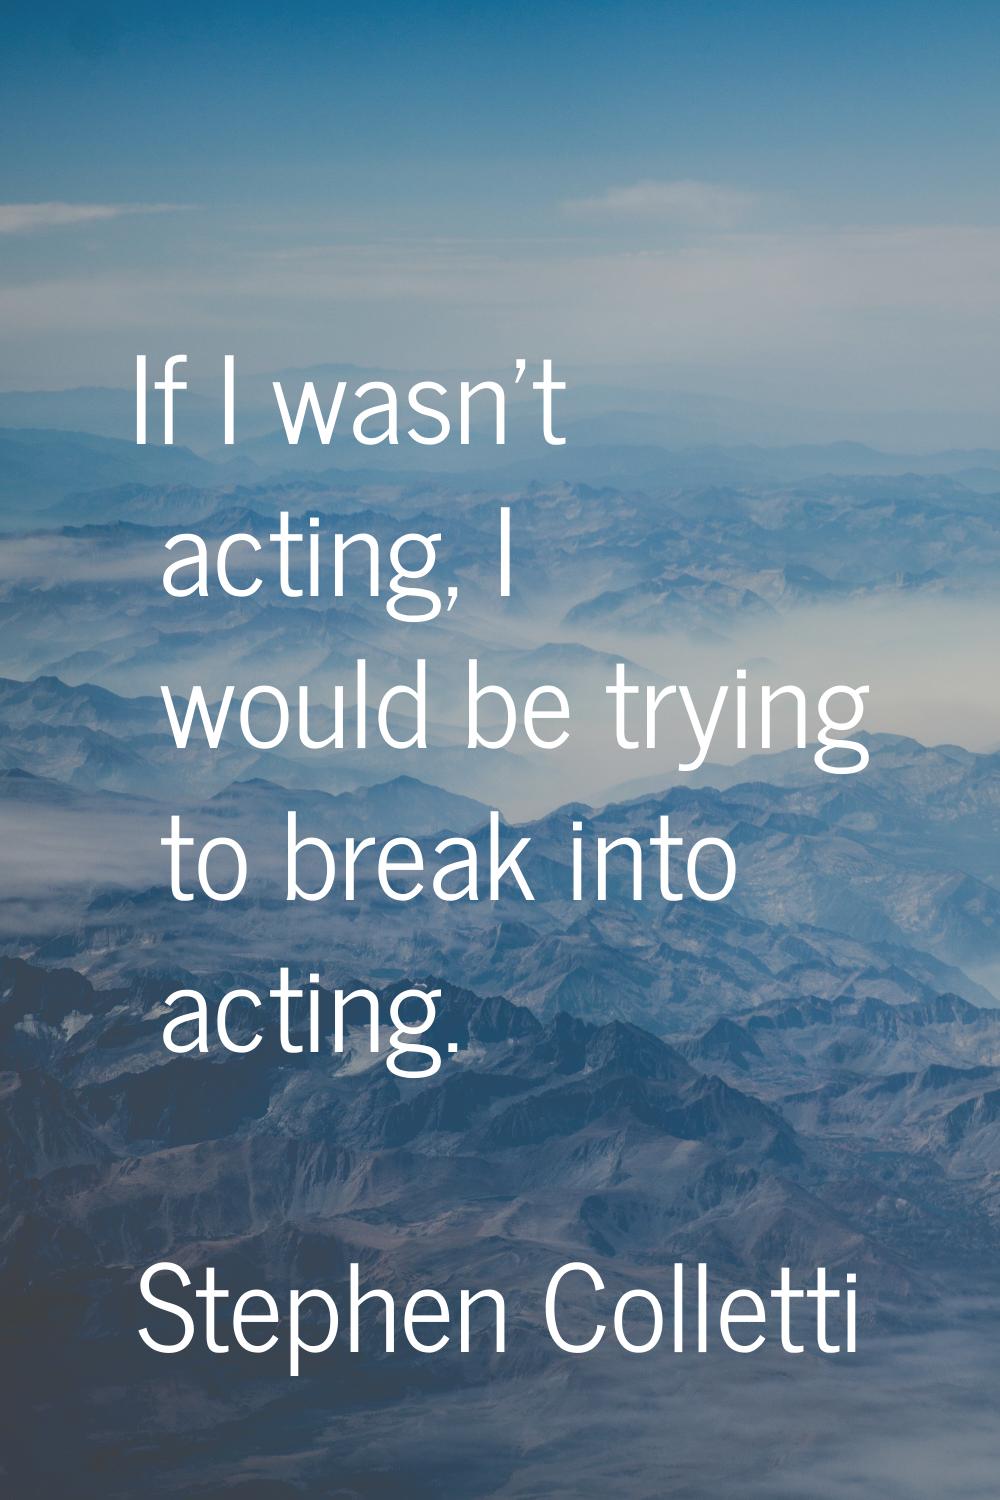 If I wasn't acting, I would be trying to break into acting.